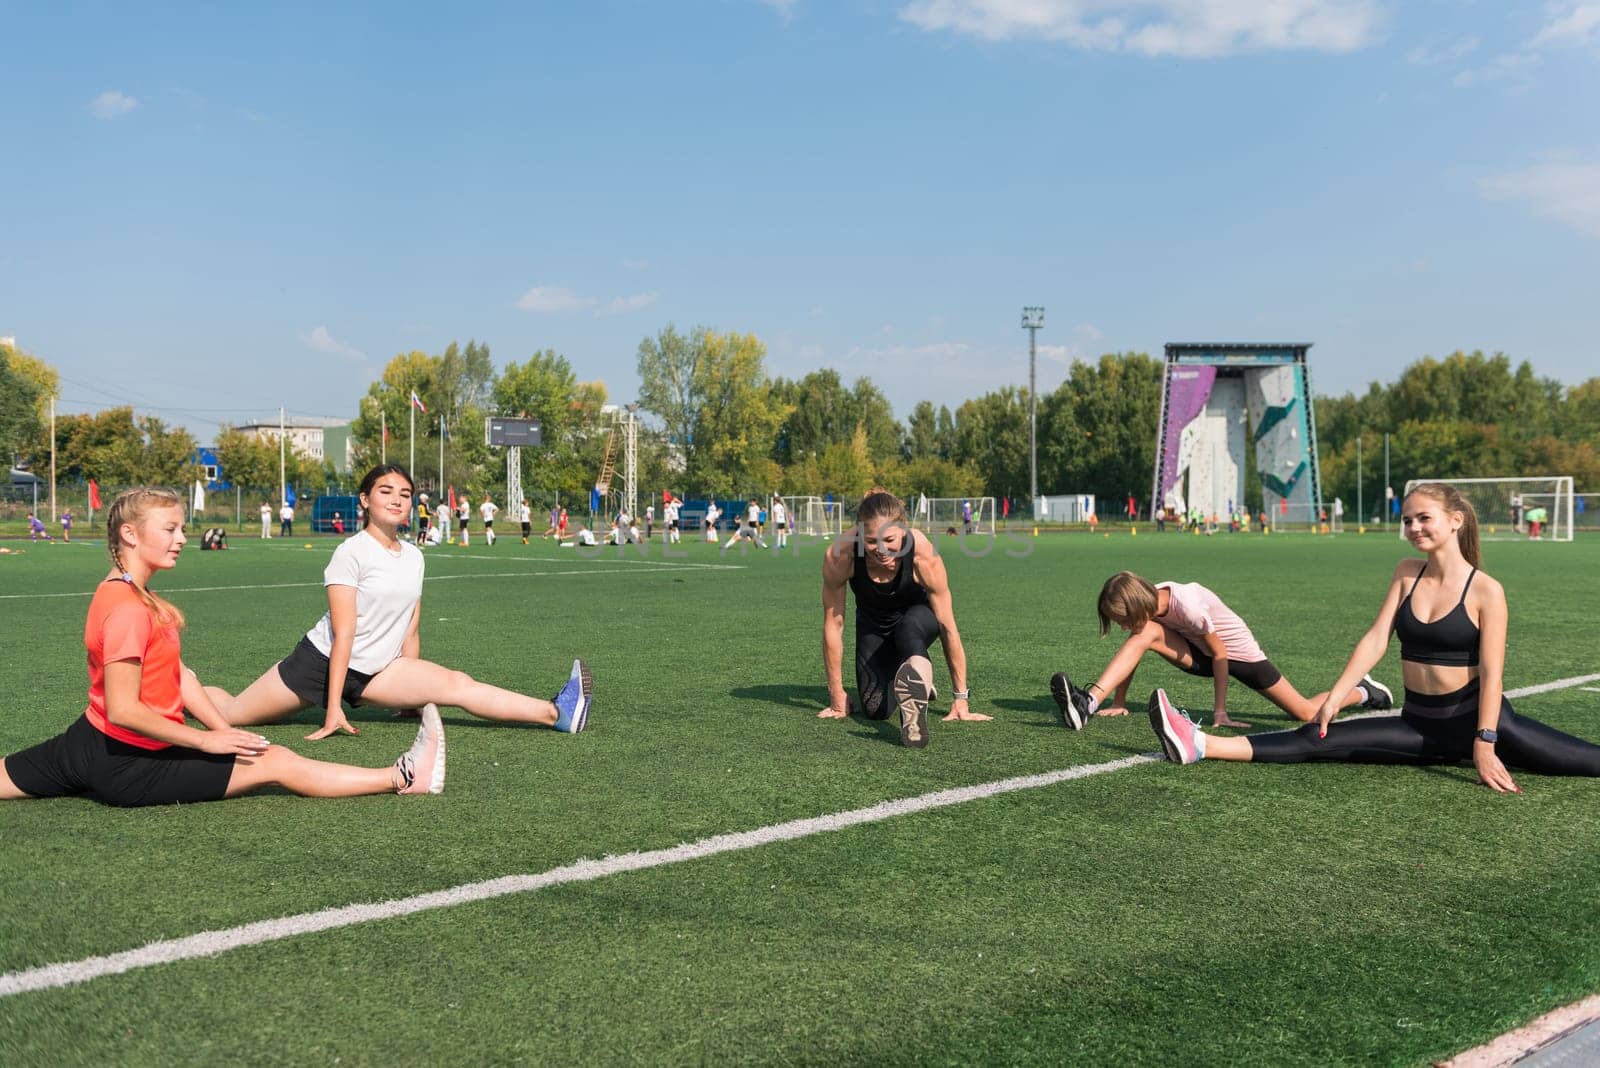 Female coach and group of children conducts a training session at the stadium outdoors